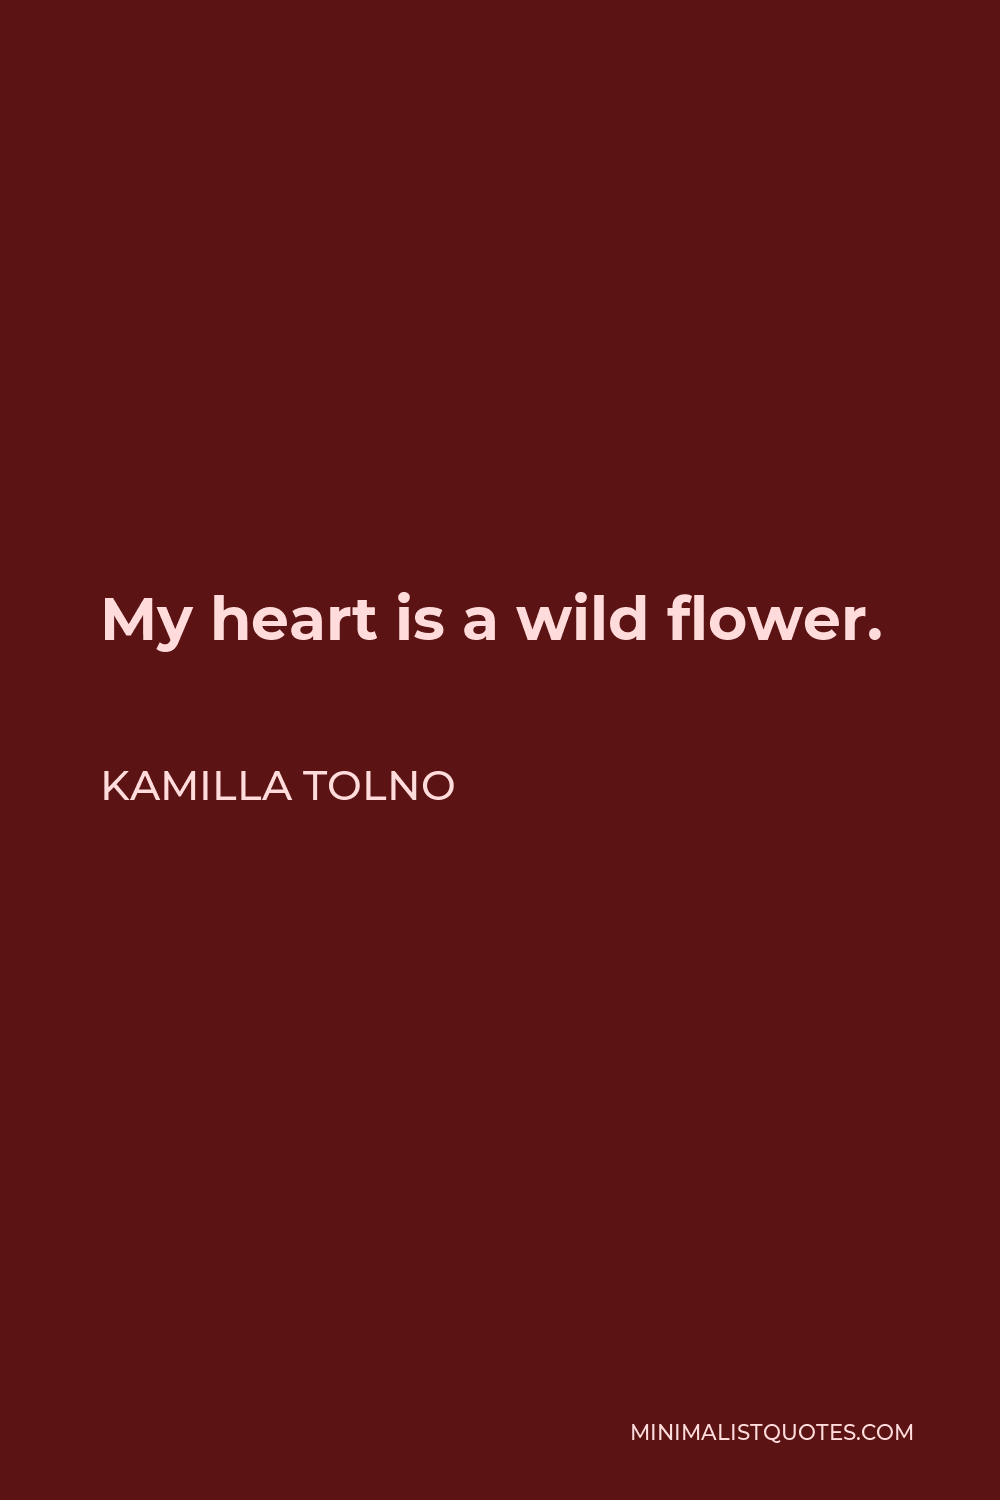 Kamilla Tolno Quote - My heart is a wild flower.